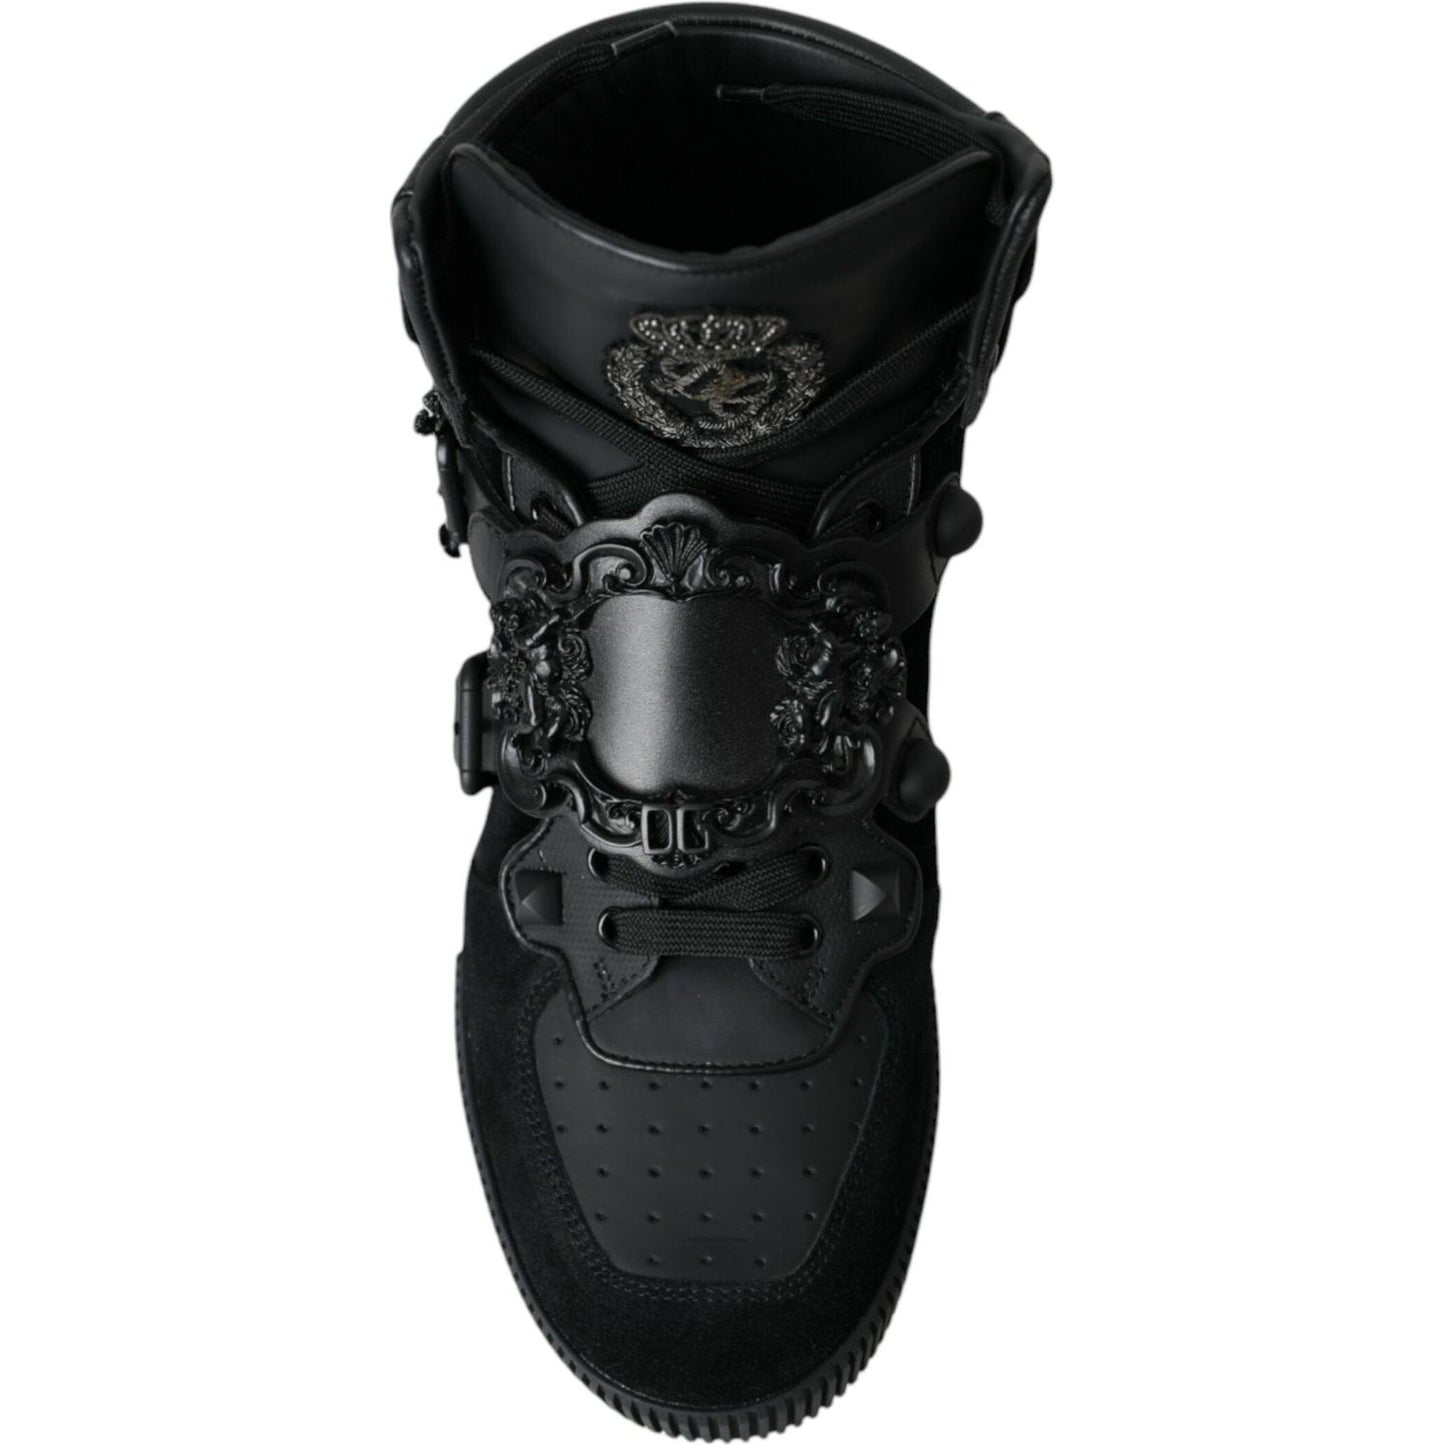 Dolce & Gabbana Black Logo Leather Miami High Top Sneakers Shoes black-logo-leather-miami-high-top-sneakers-shoes